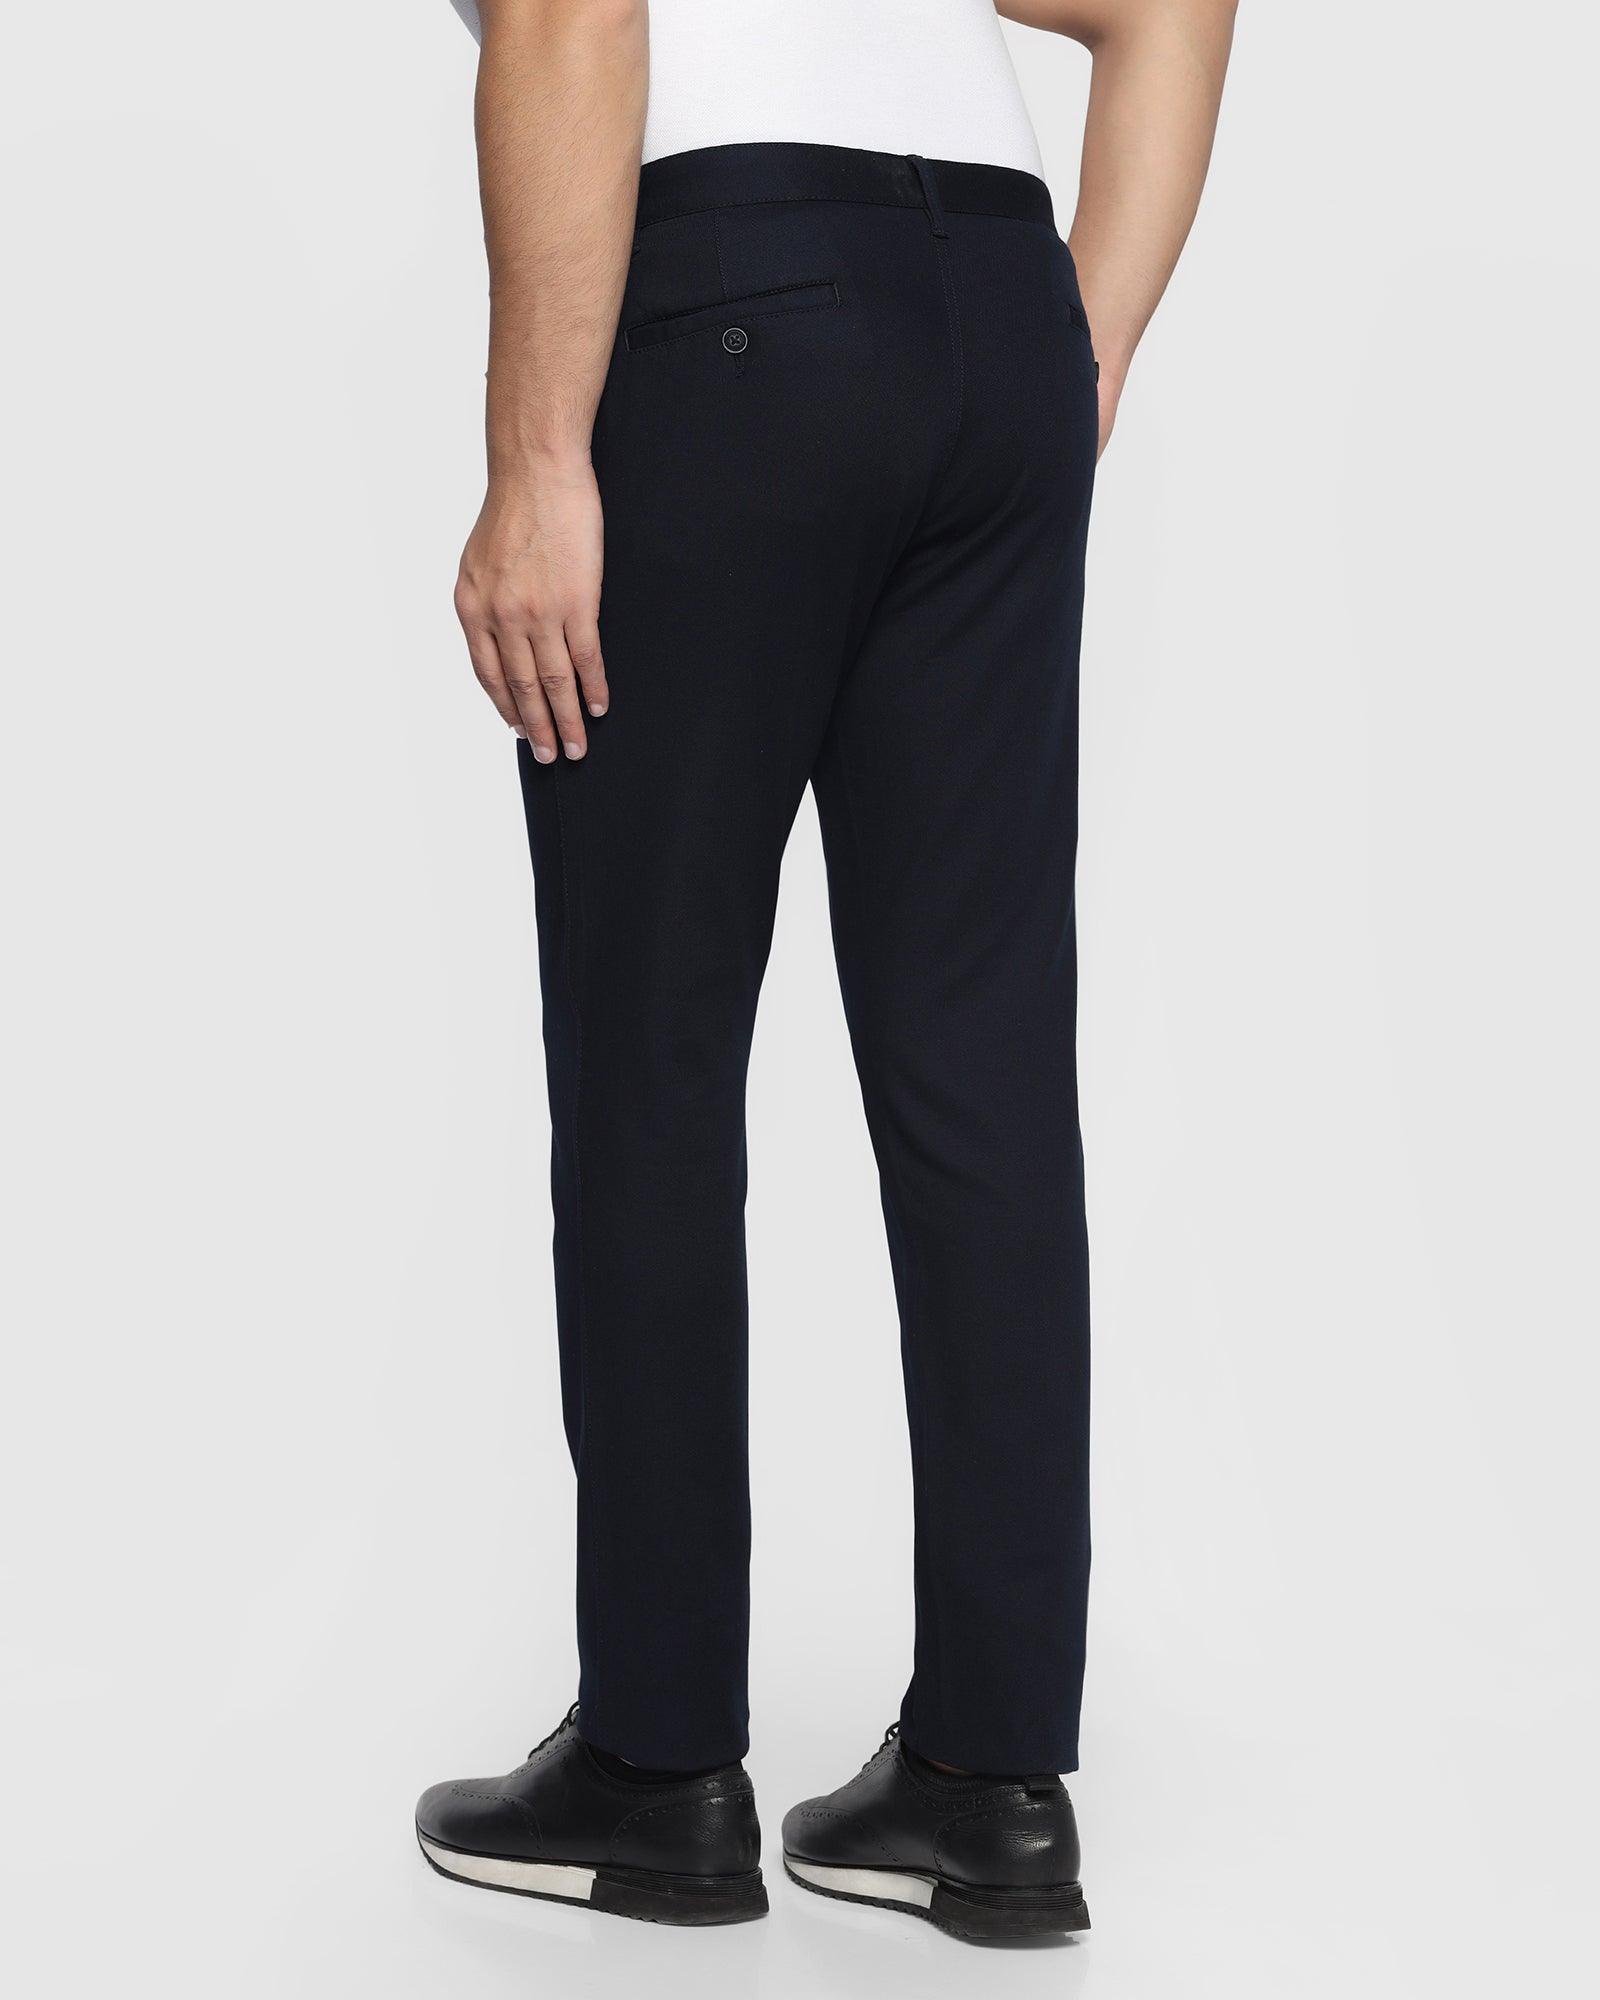 Slim Fit B-91 Casual Navy Textured Khakis - Duncan